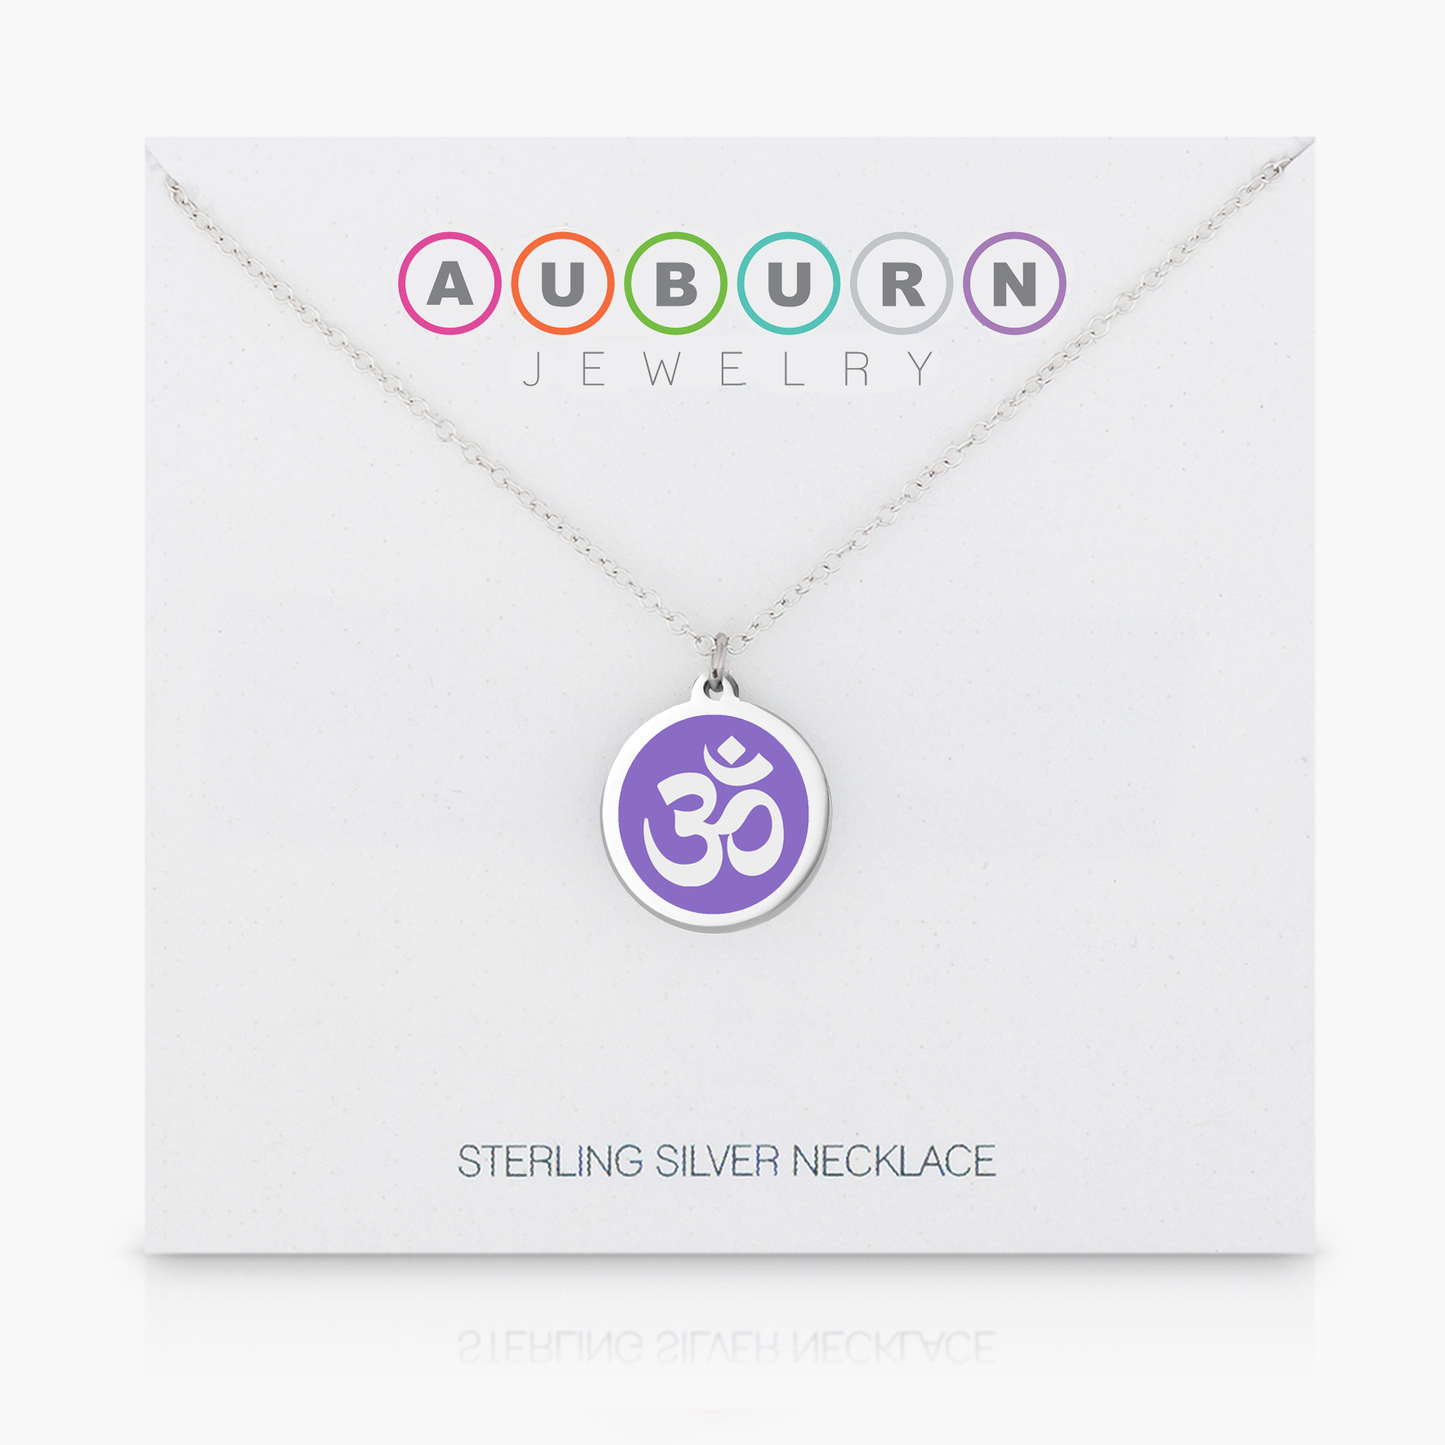 ORIGINAL OM CHARM in sterling silver with rhodium plate